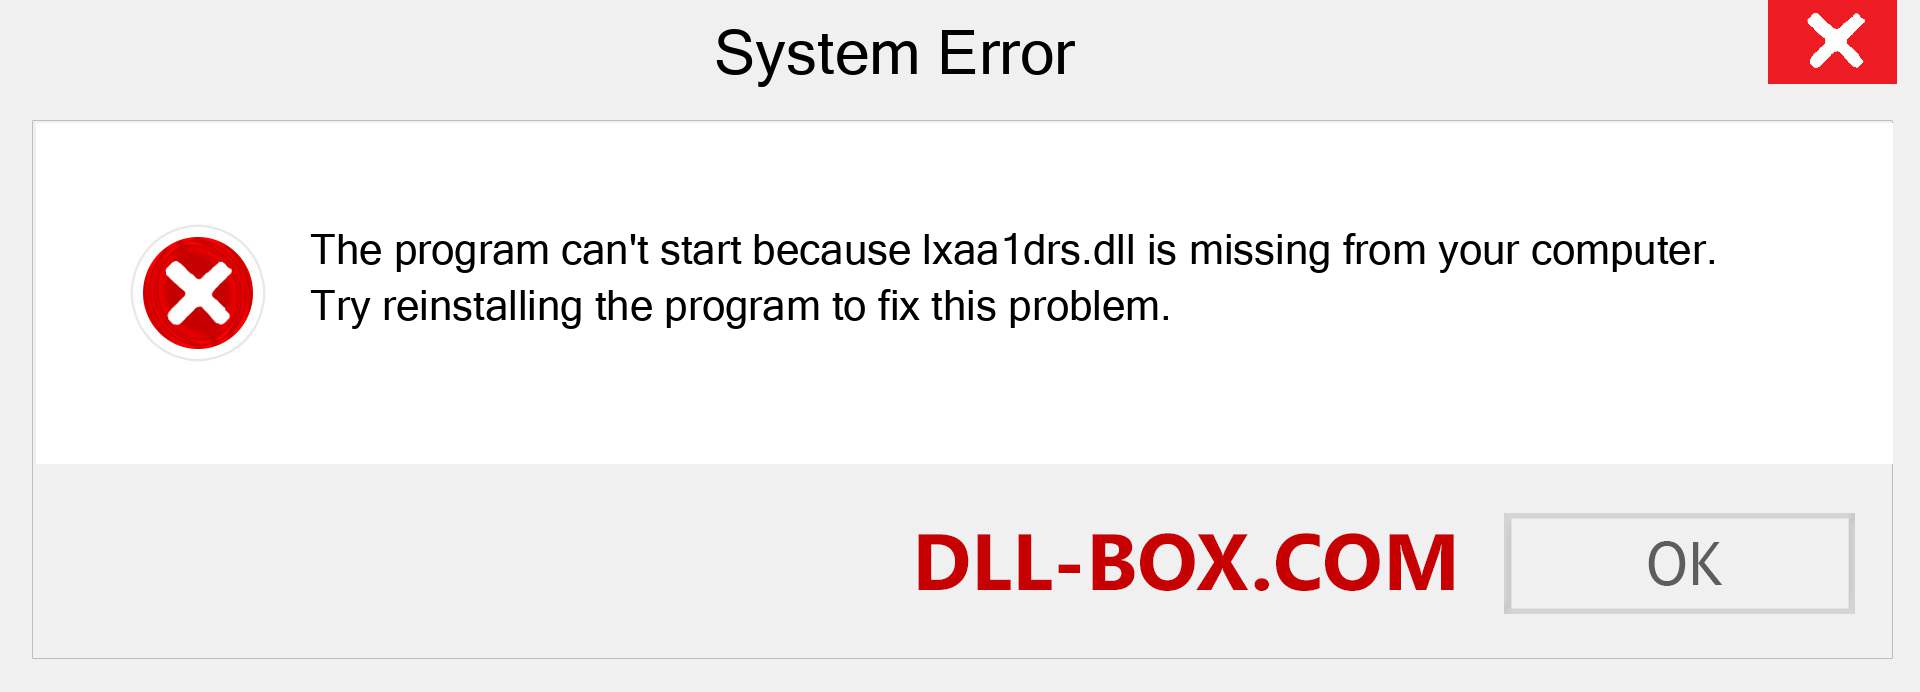  lxaa1drs.dll file is missing?. Download for Windows 7, 8, 10 - Fix  lxaa1drs dll Missing Error on Windows, photos, images